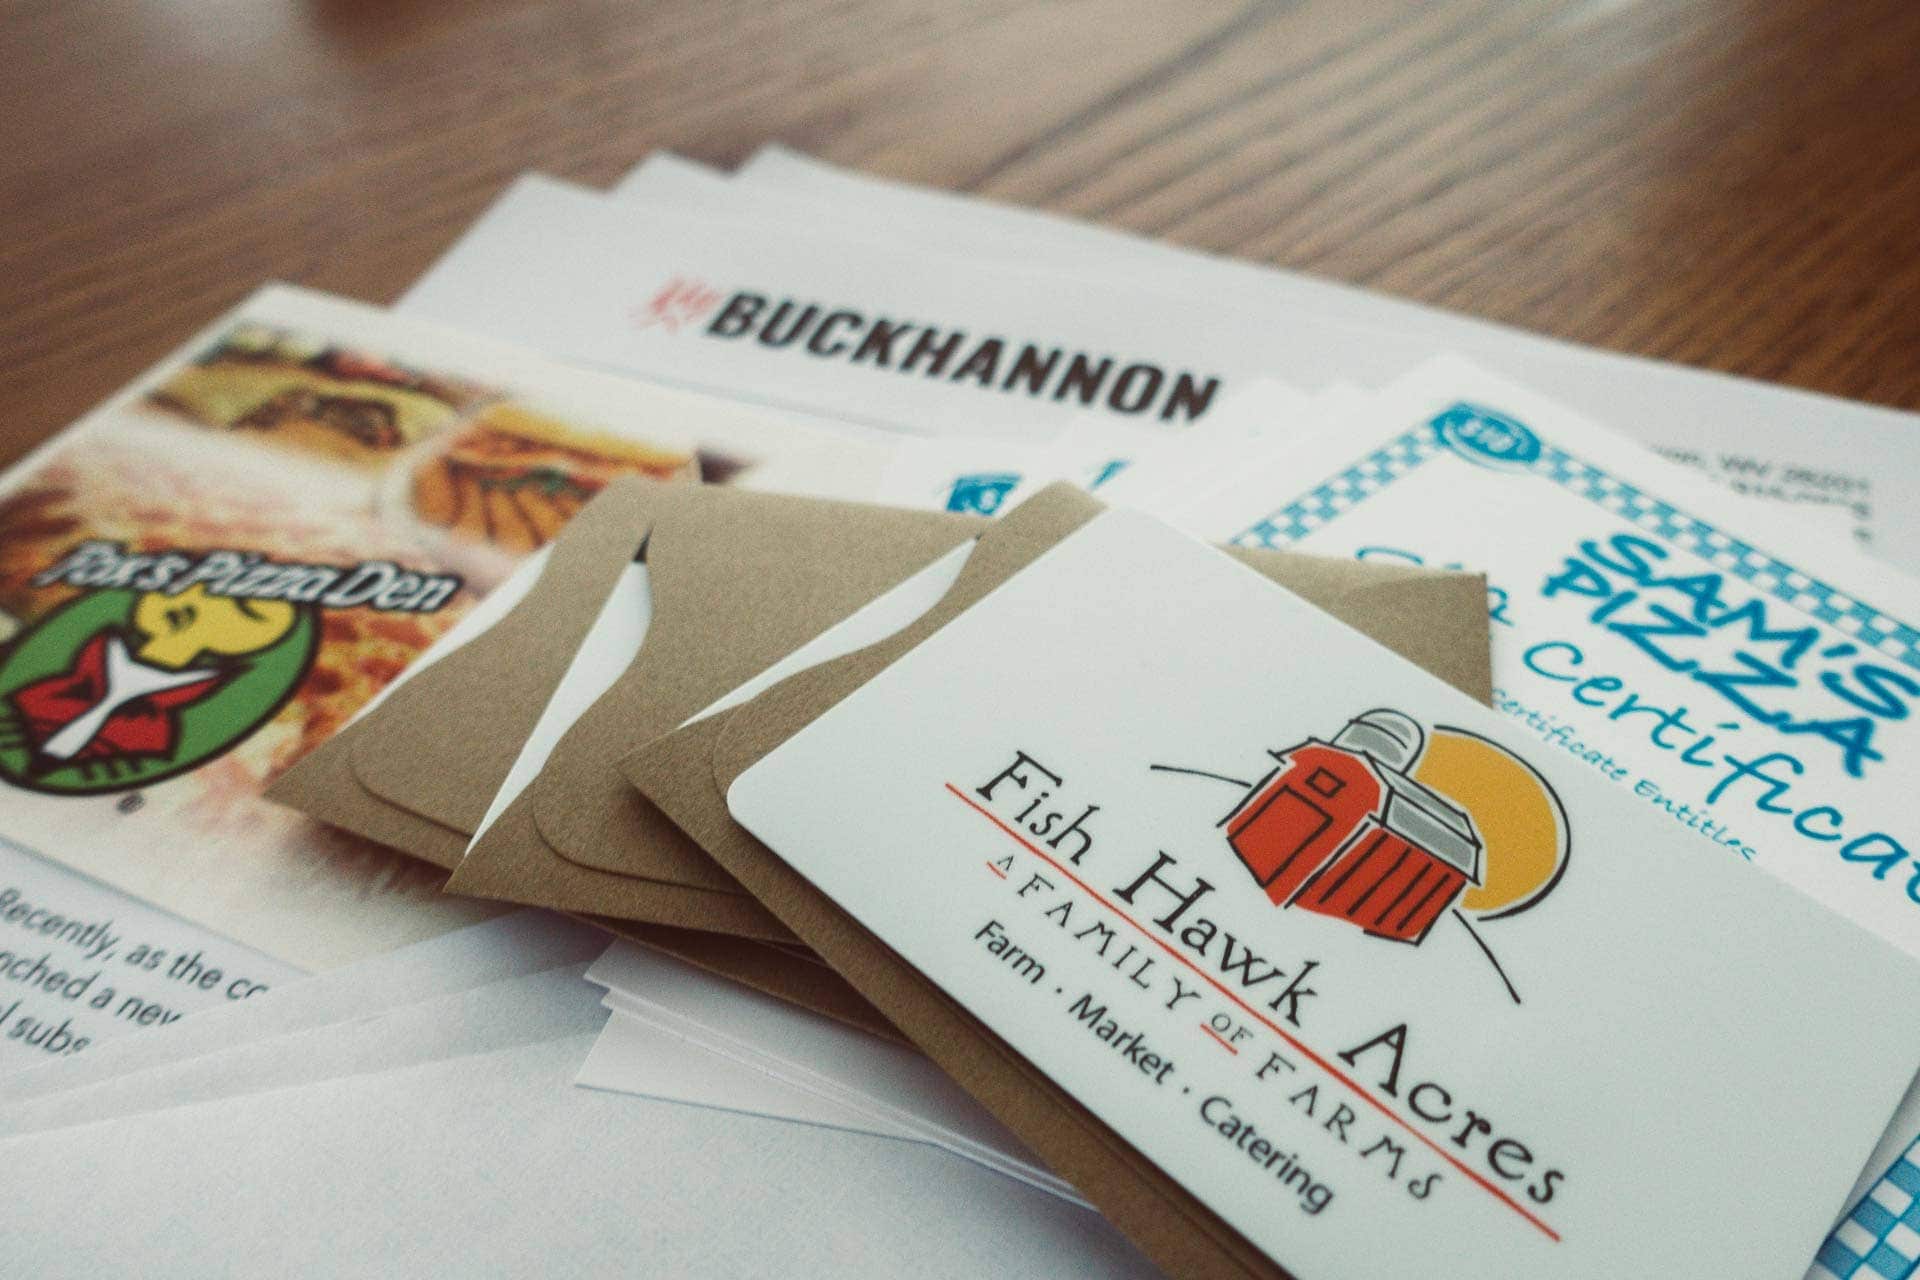 A batch of gift cards about to go out in the mail. Subscribe ot My Buckhannon today and get a $25 gift certificate to a local business of your choice!